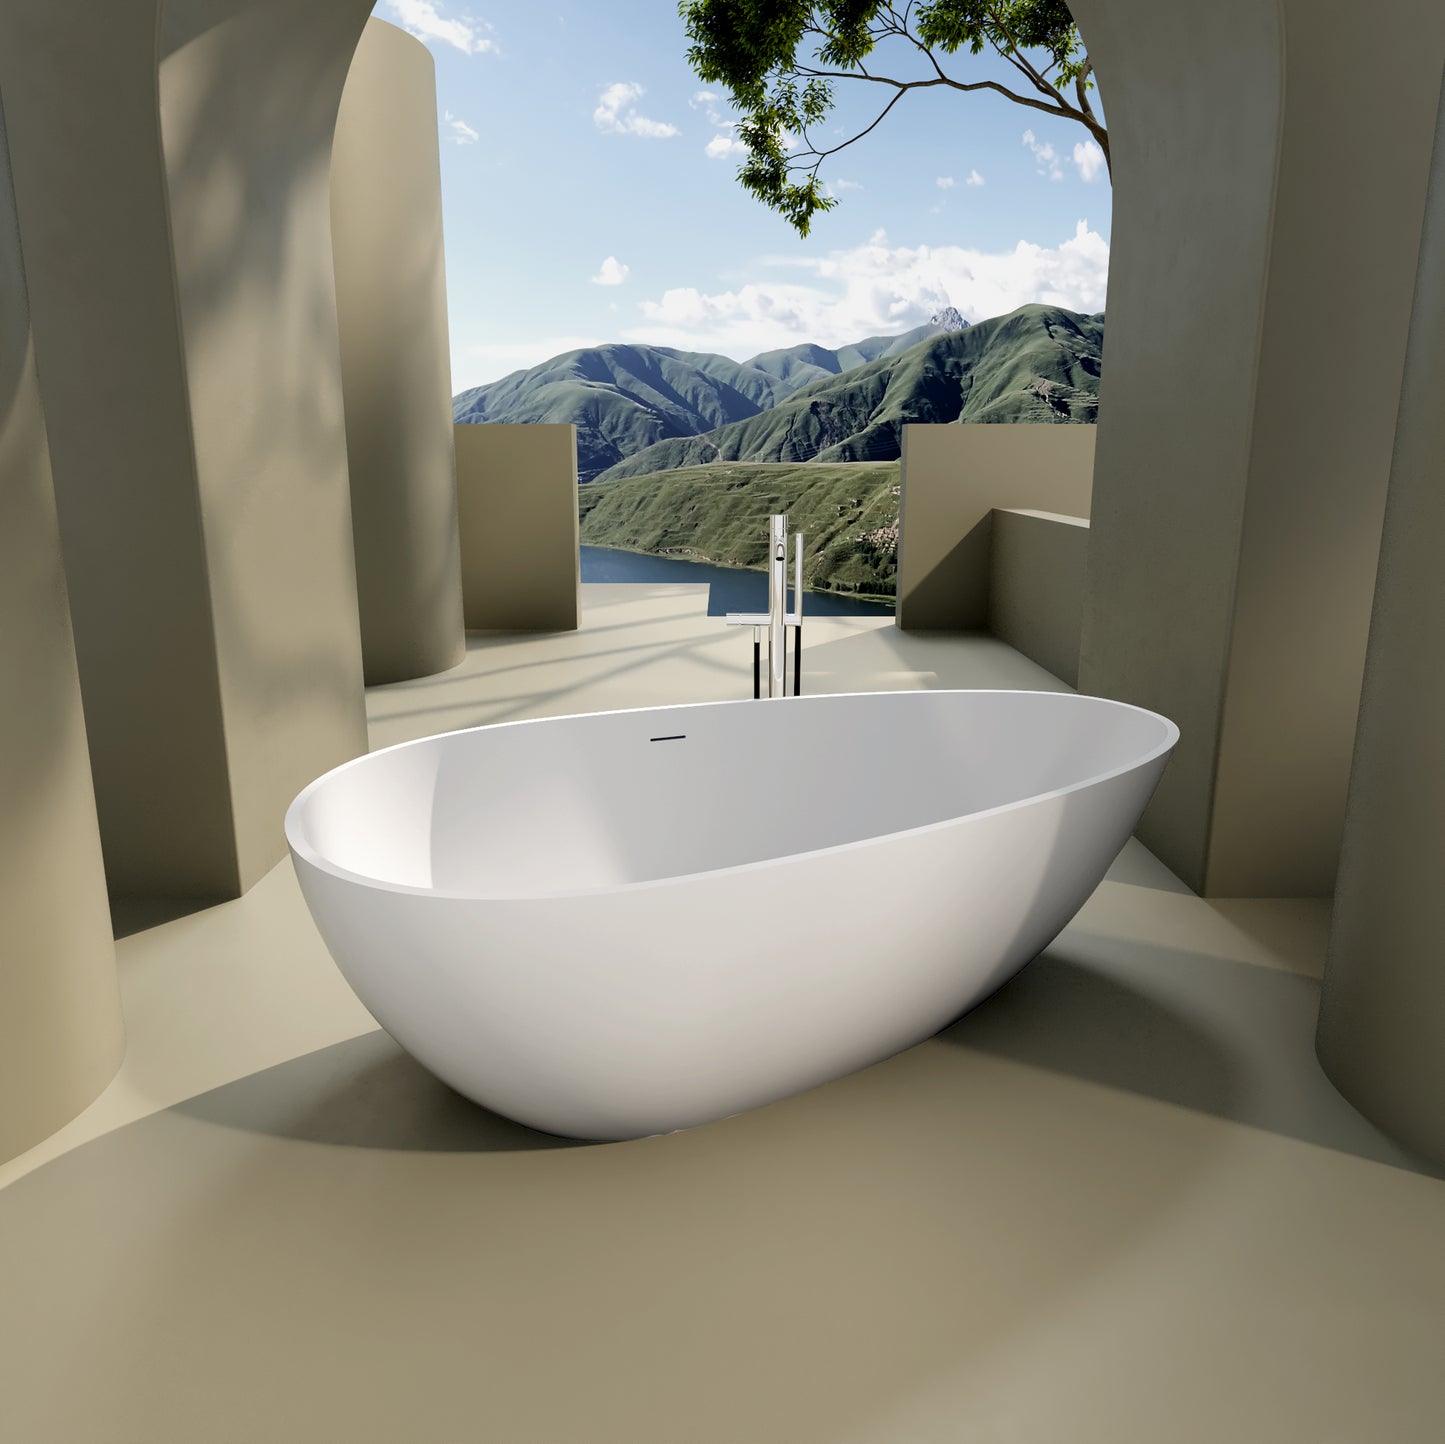 Contemporary Stone Resin Flatbottom Freestanding Soaking Bathtub with Overflow in Matte White, cUPC Certified - 66.88*33.5 22S02-67